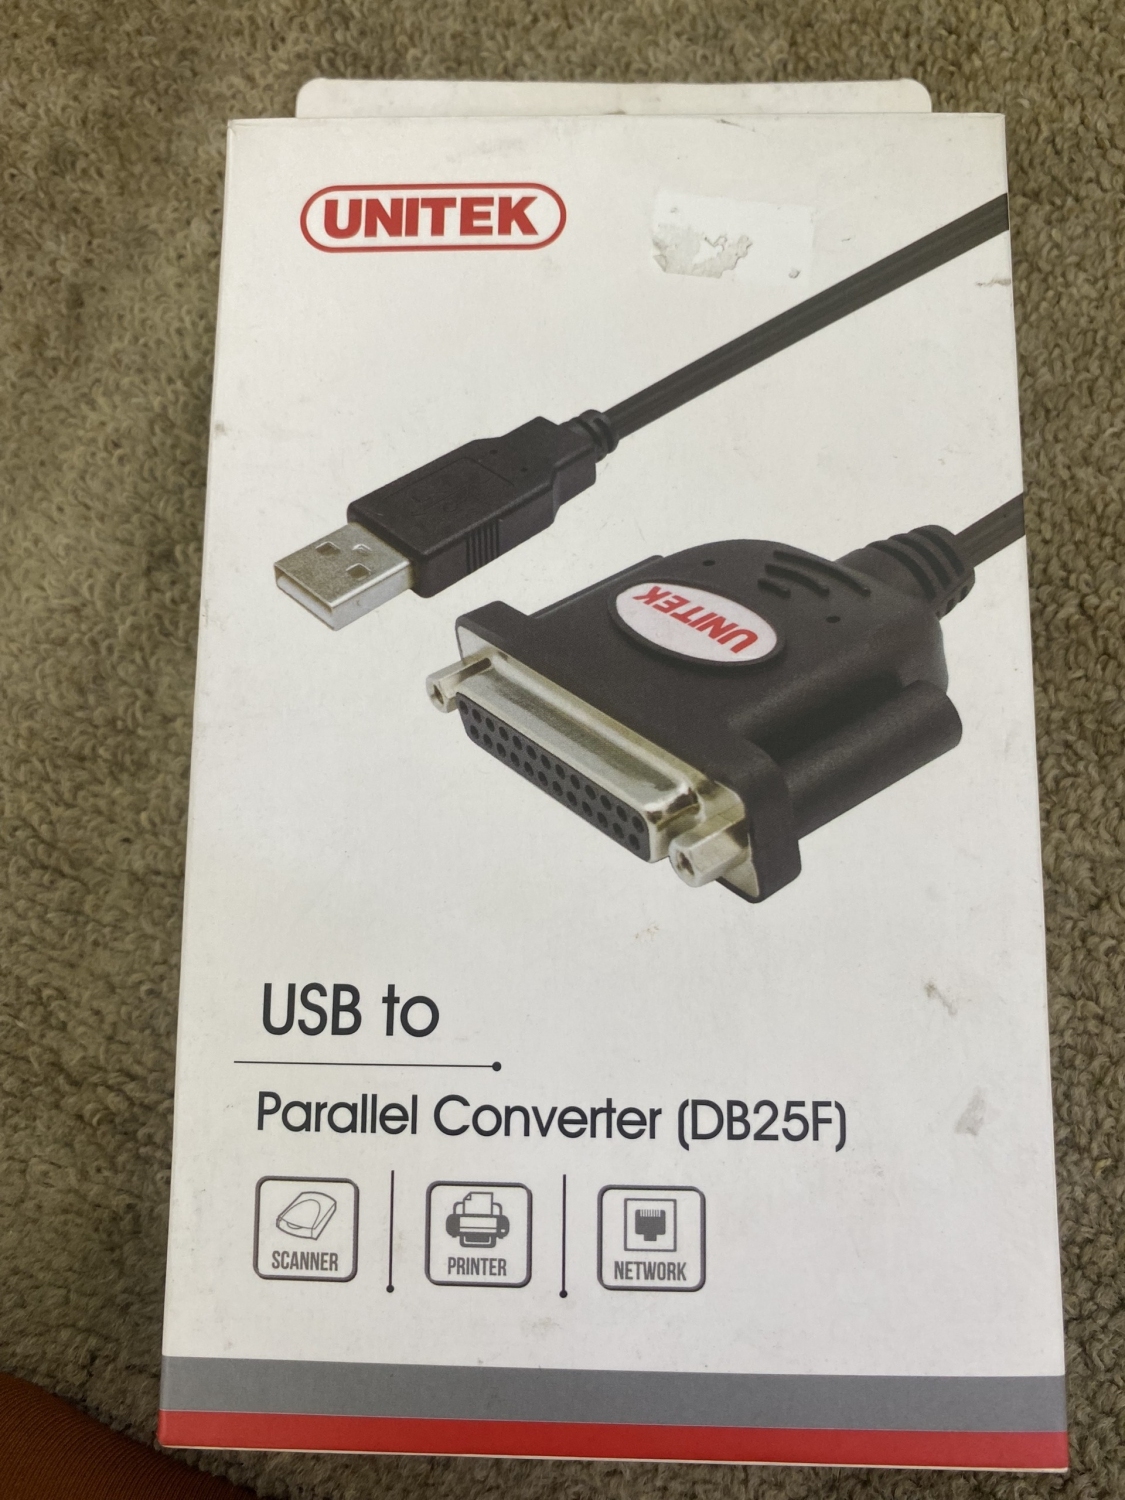 USB to Sparallel Converter